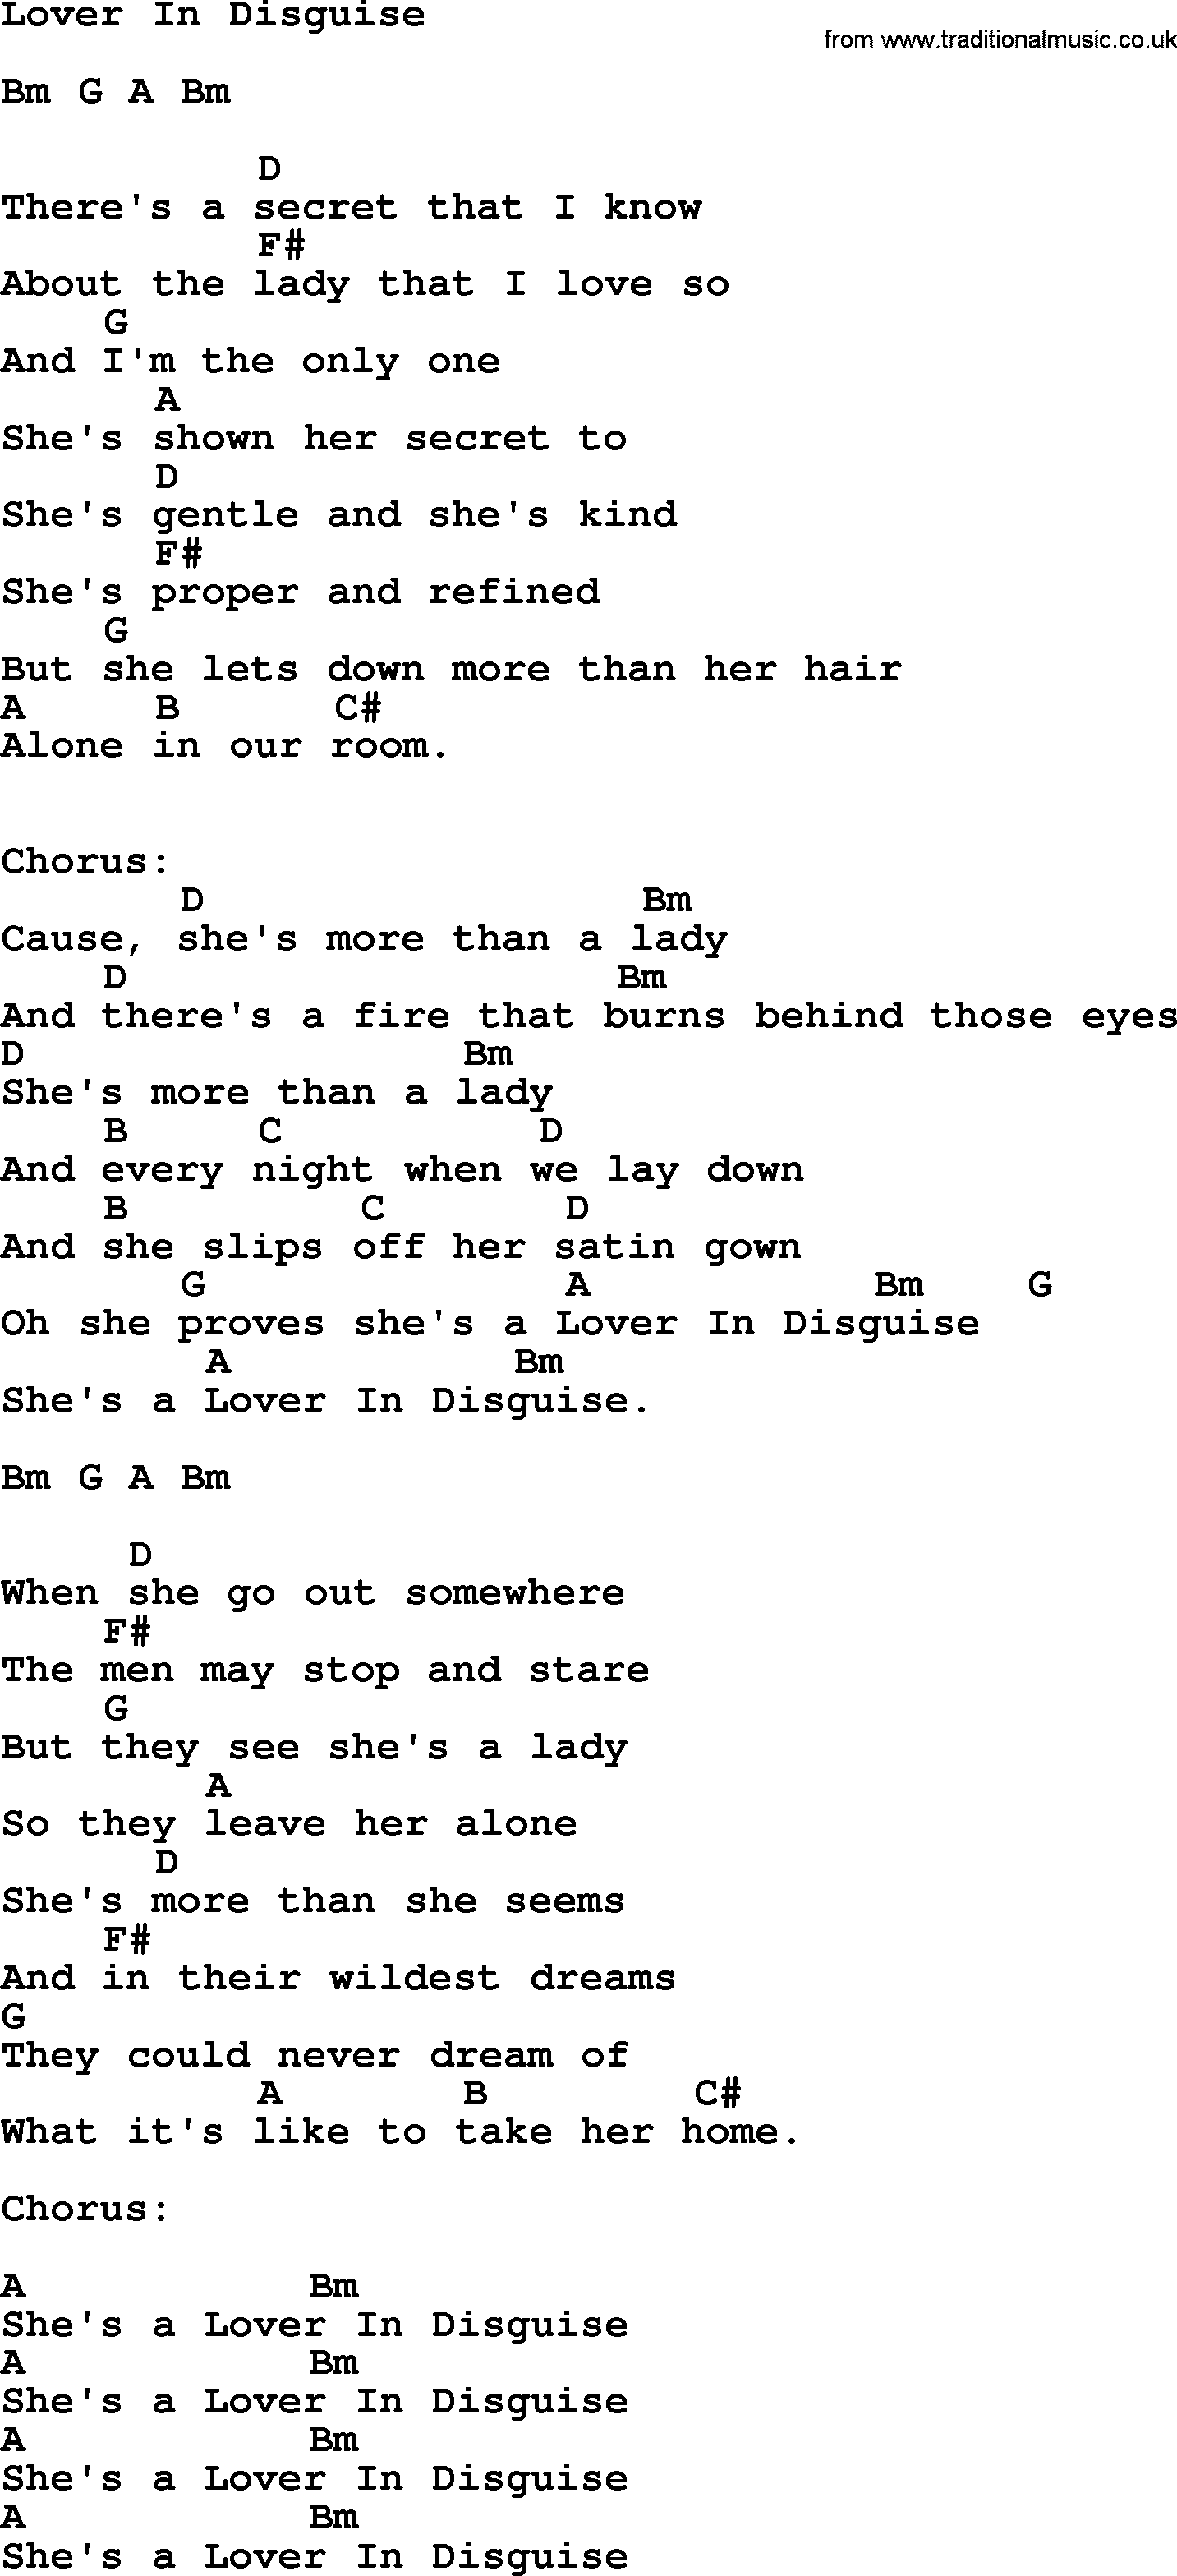 George Strait song: Lover In Disguise, lyrics and chords